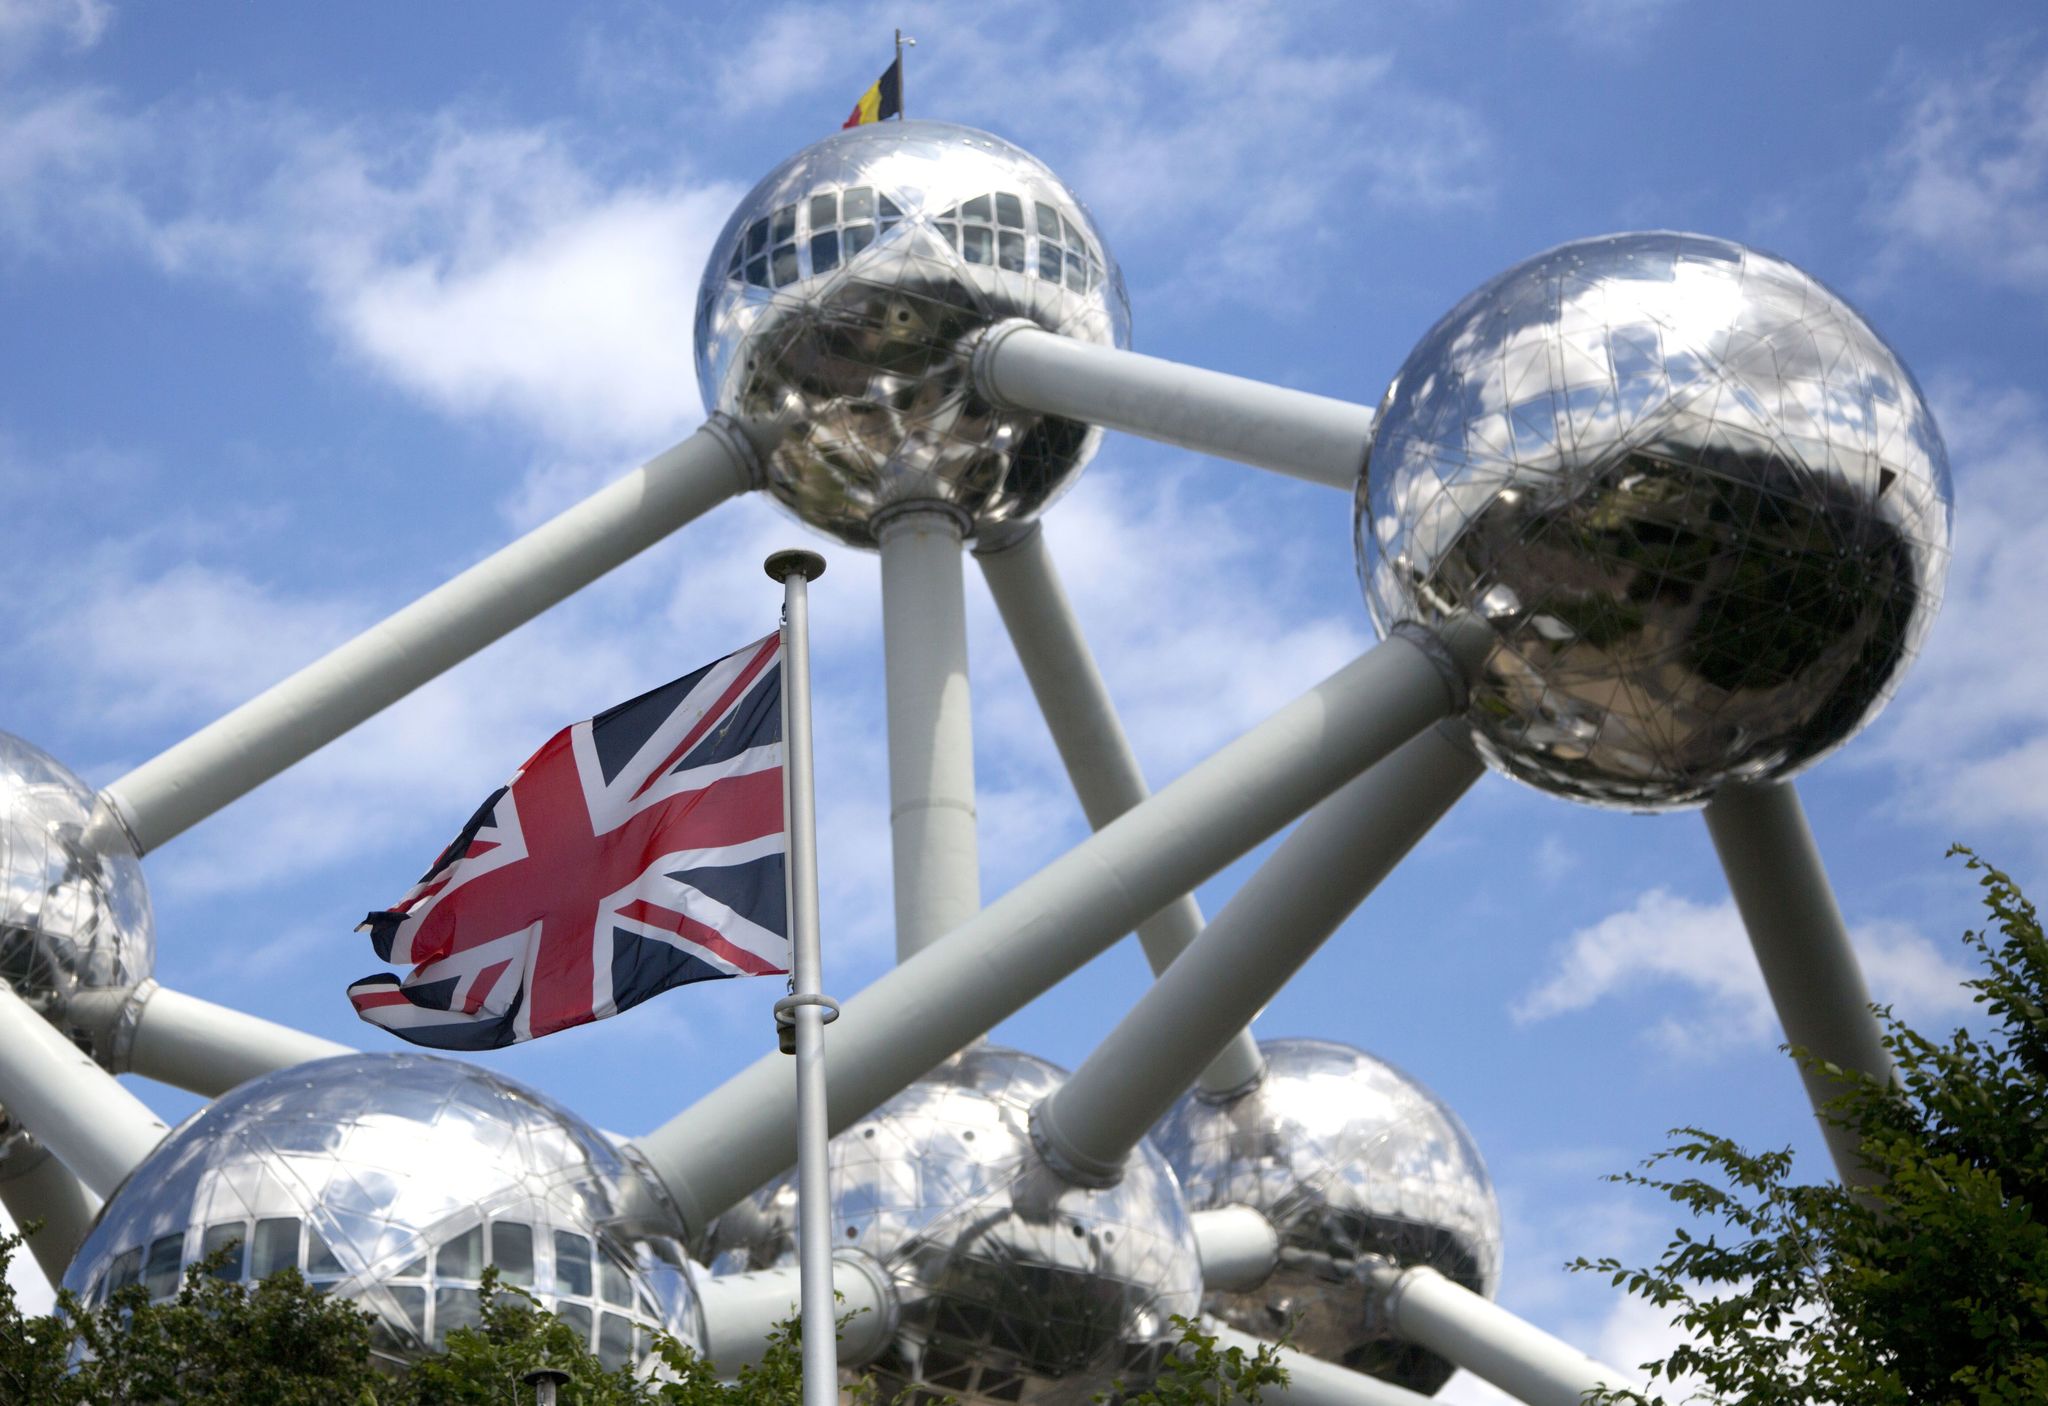 The British flag flutters in the wind in front of a model of the Brussels Atomium construction at the Mini-Europe park in Brussels on Wednesday. British voters go to the polls on Thursday for a national referendum to vote whether to leave or stay in the EU.